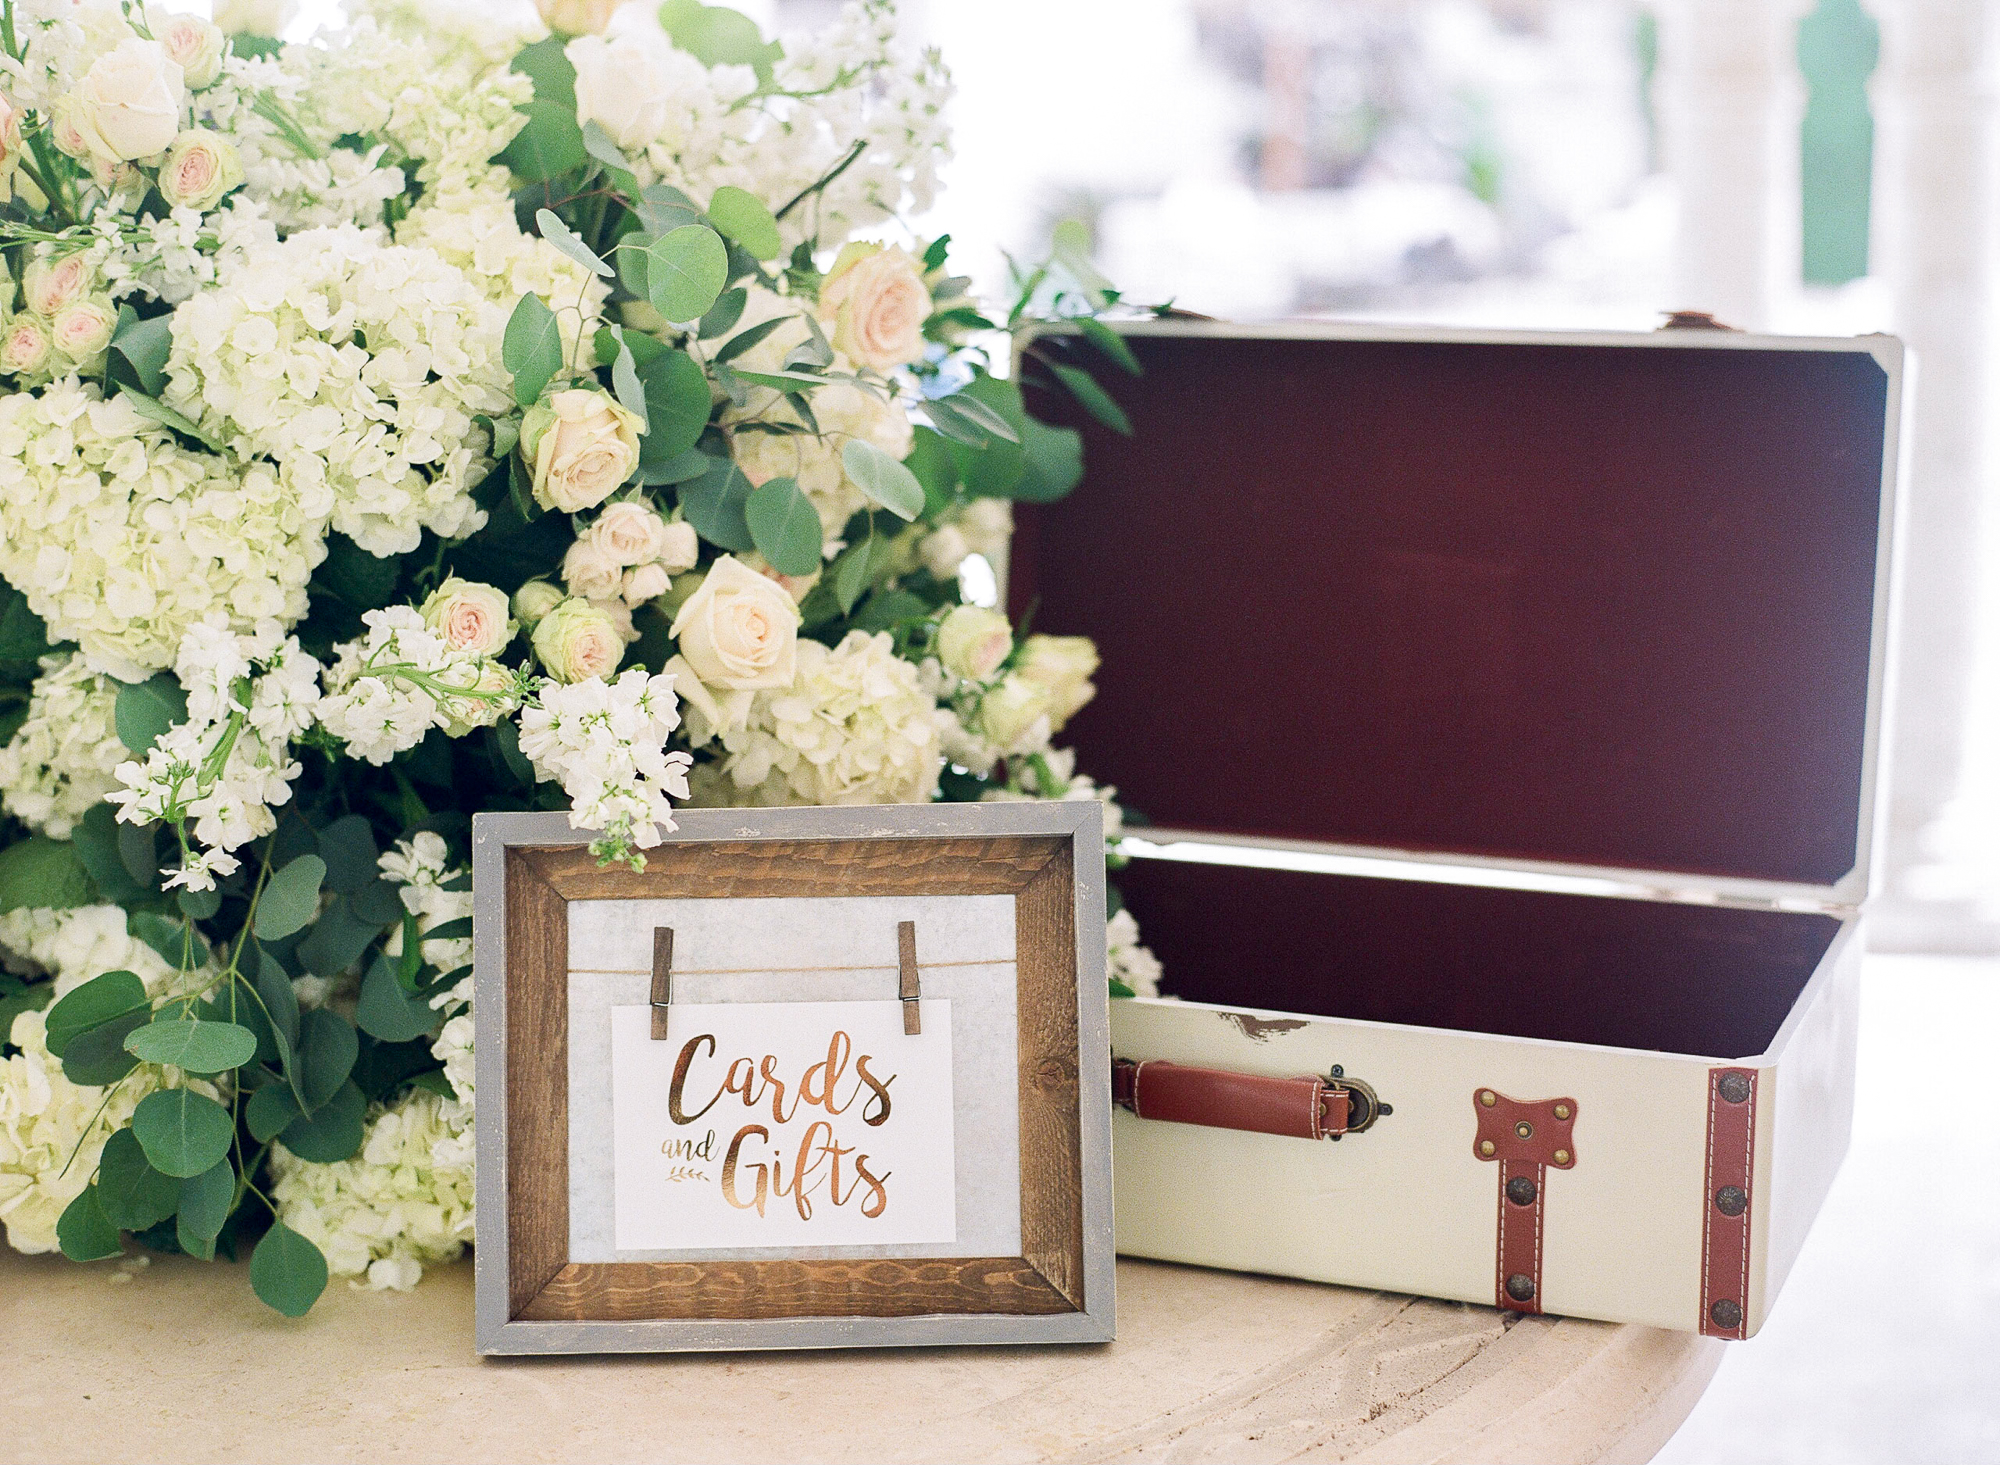 The wedding gifts and cards were put into a vintage suitcase